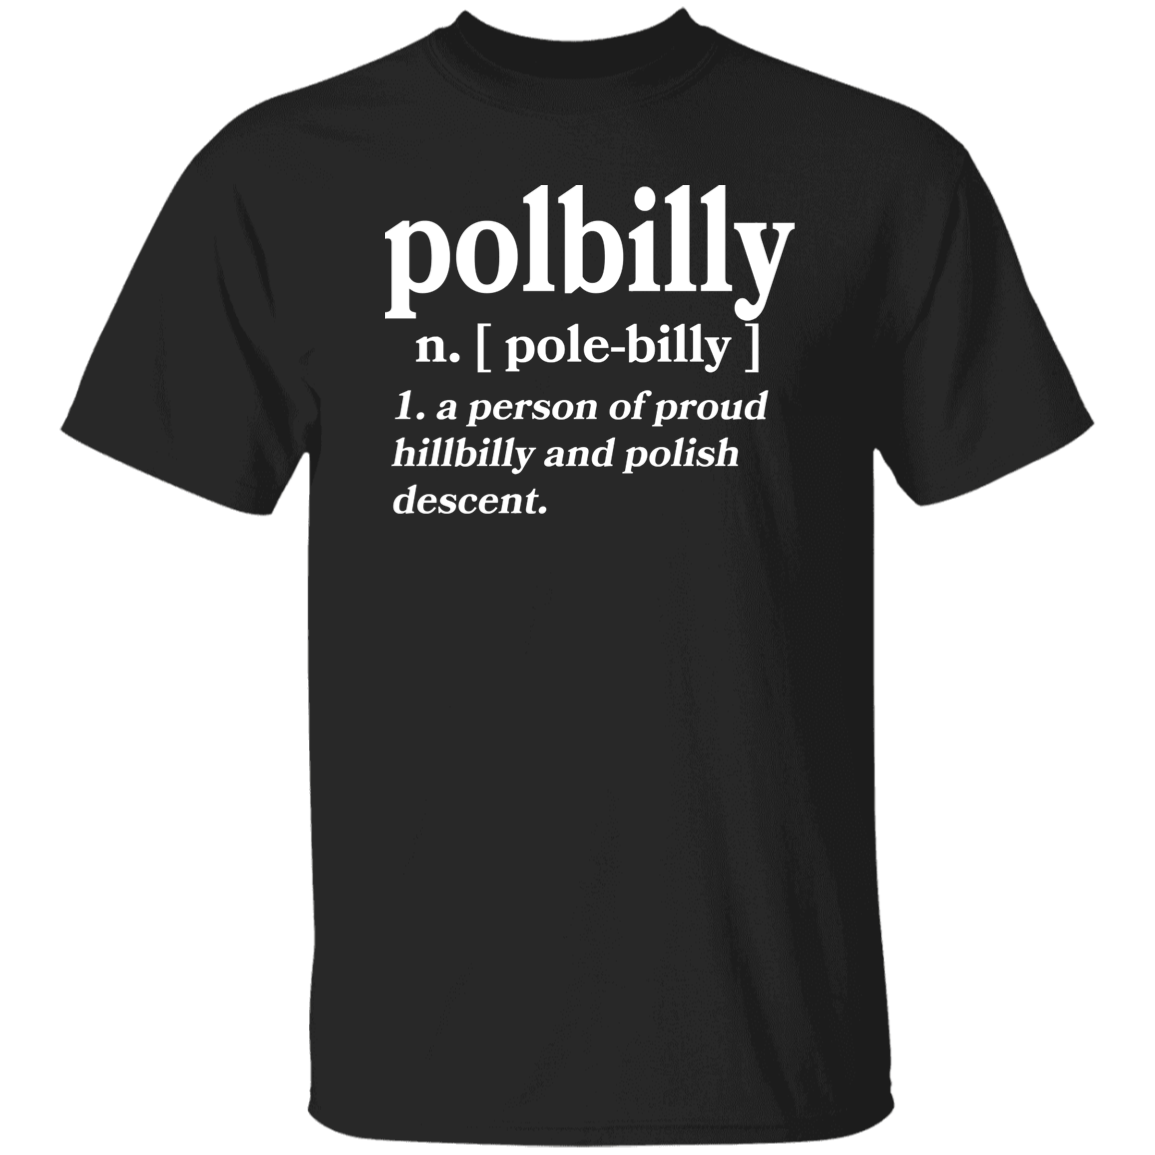 PolBIlly A Person Of Hillbilly And Polish Descent Apparel CustomCat G500 5.3 oz. T-Shirt Black S